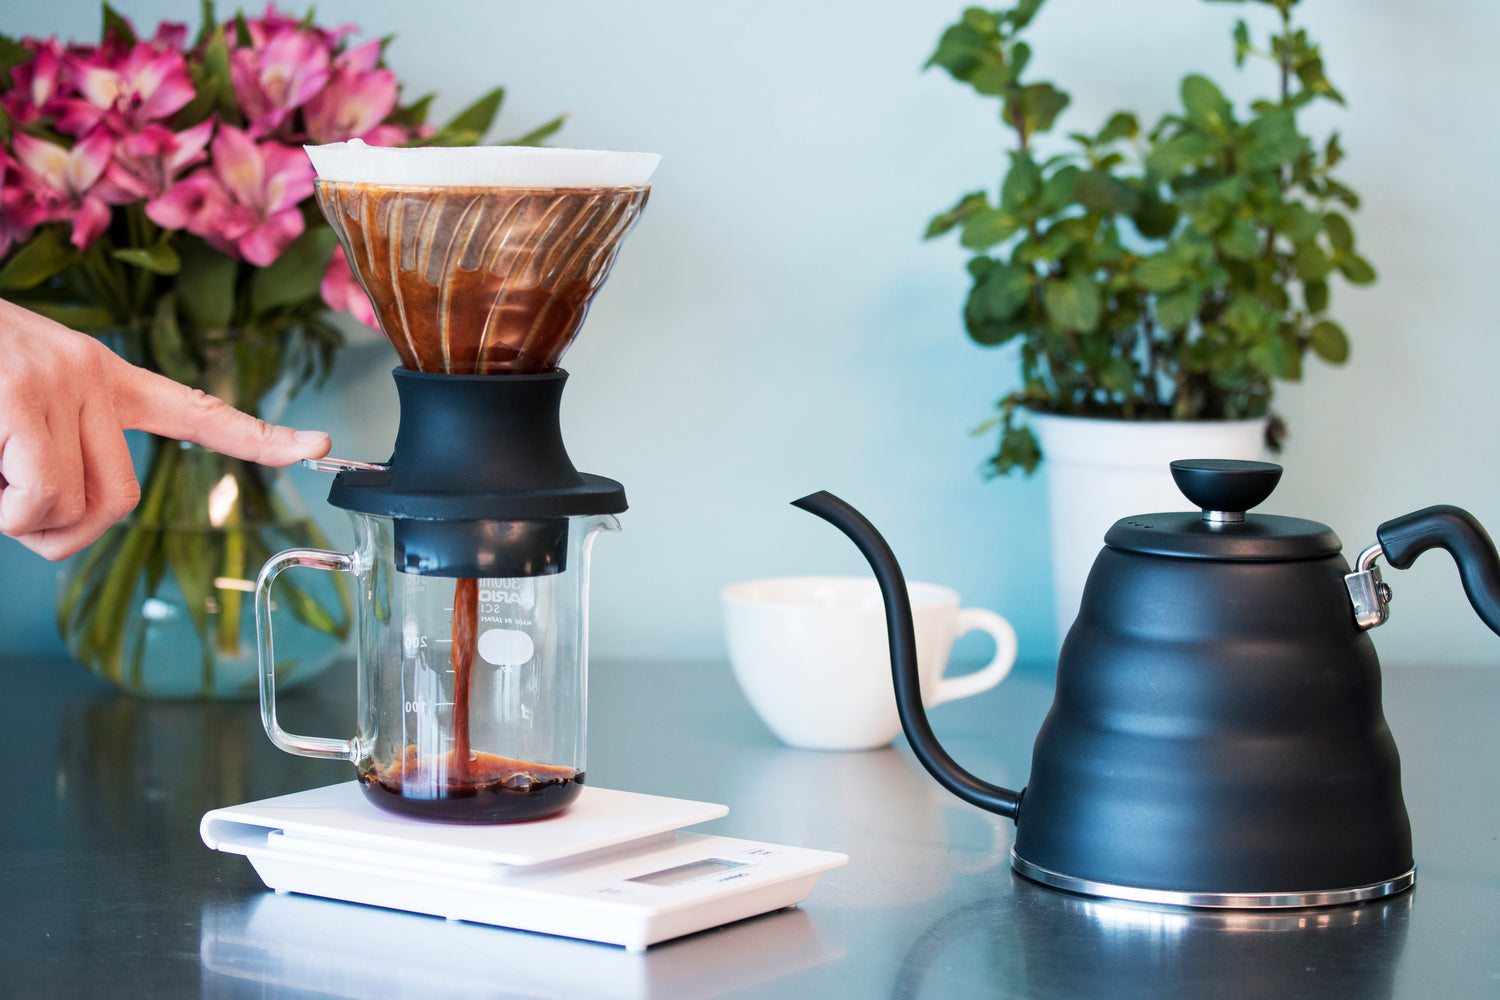 Finger pushing switch to pour brewed coffee from a cone-shaped glass dripper with white paper filter, brewed coffee inside, into a glass beaker with measurement markings in white and seated atop a white plastic scale. Beside the scale is a matte black bee-shaped kettle with flowers and a white ceramic coffee mug in the background.